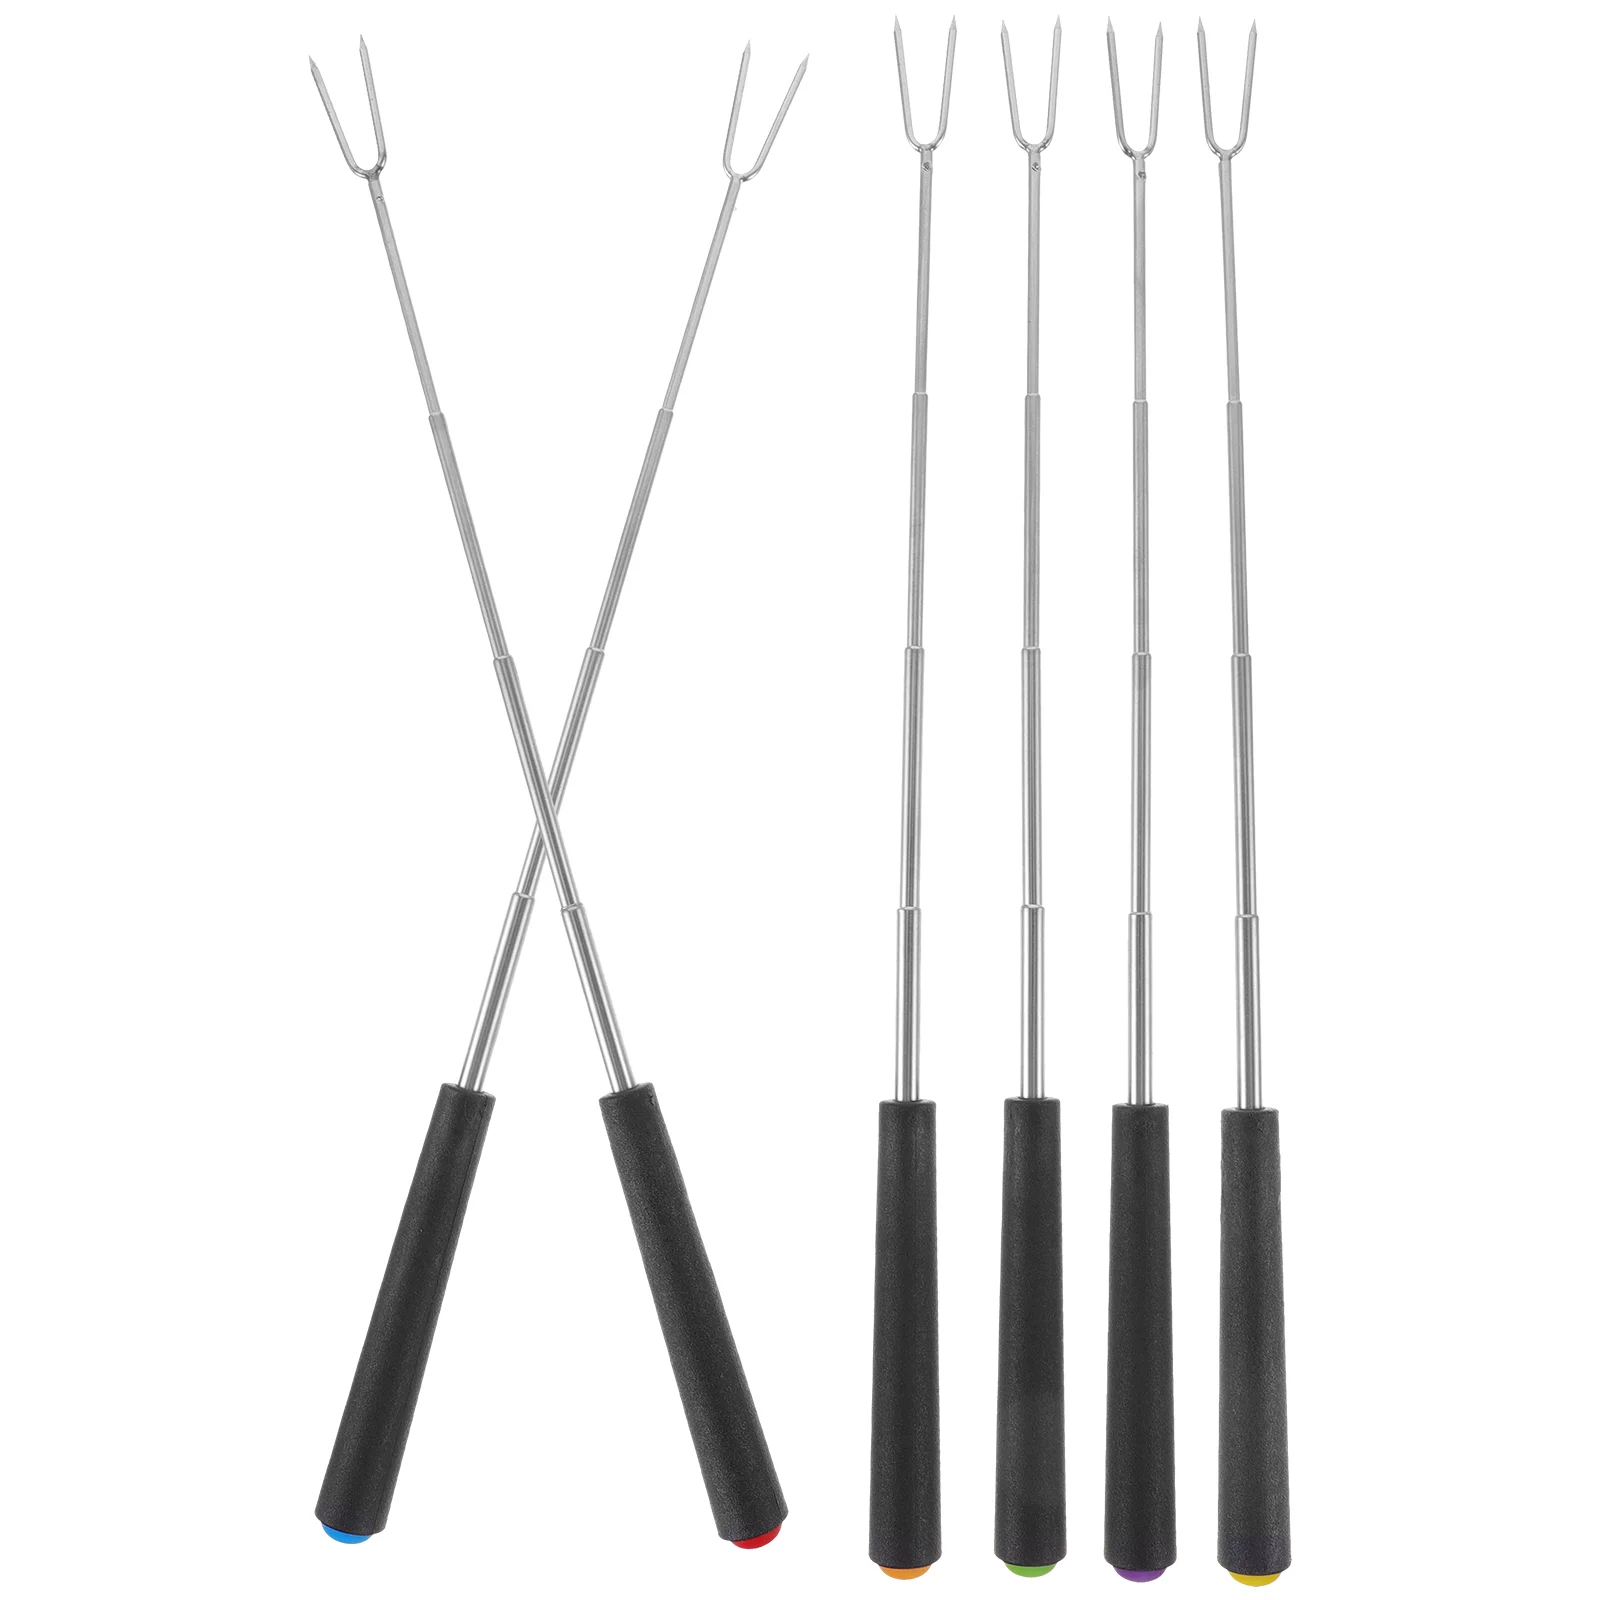 

6 Pcs Telescopic Barbecue Fork Metal Marshmallow Sticks Outdoor Bbq Meat Forks Stainless Steel Roasting Supplies Tool Grilling